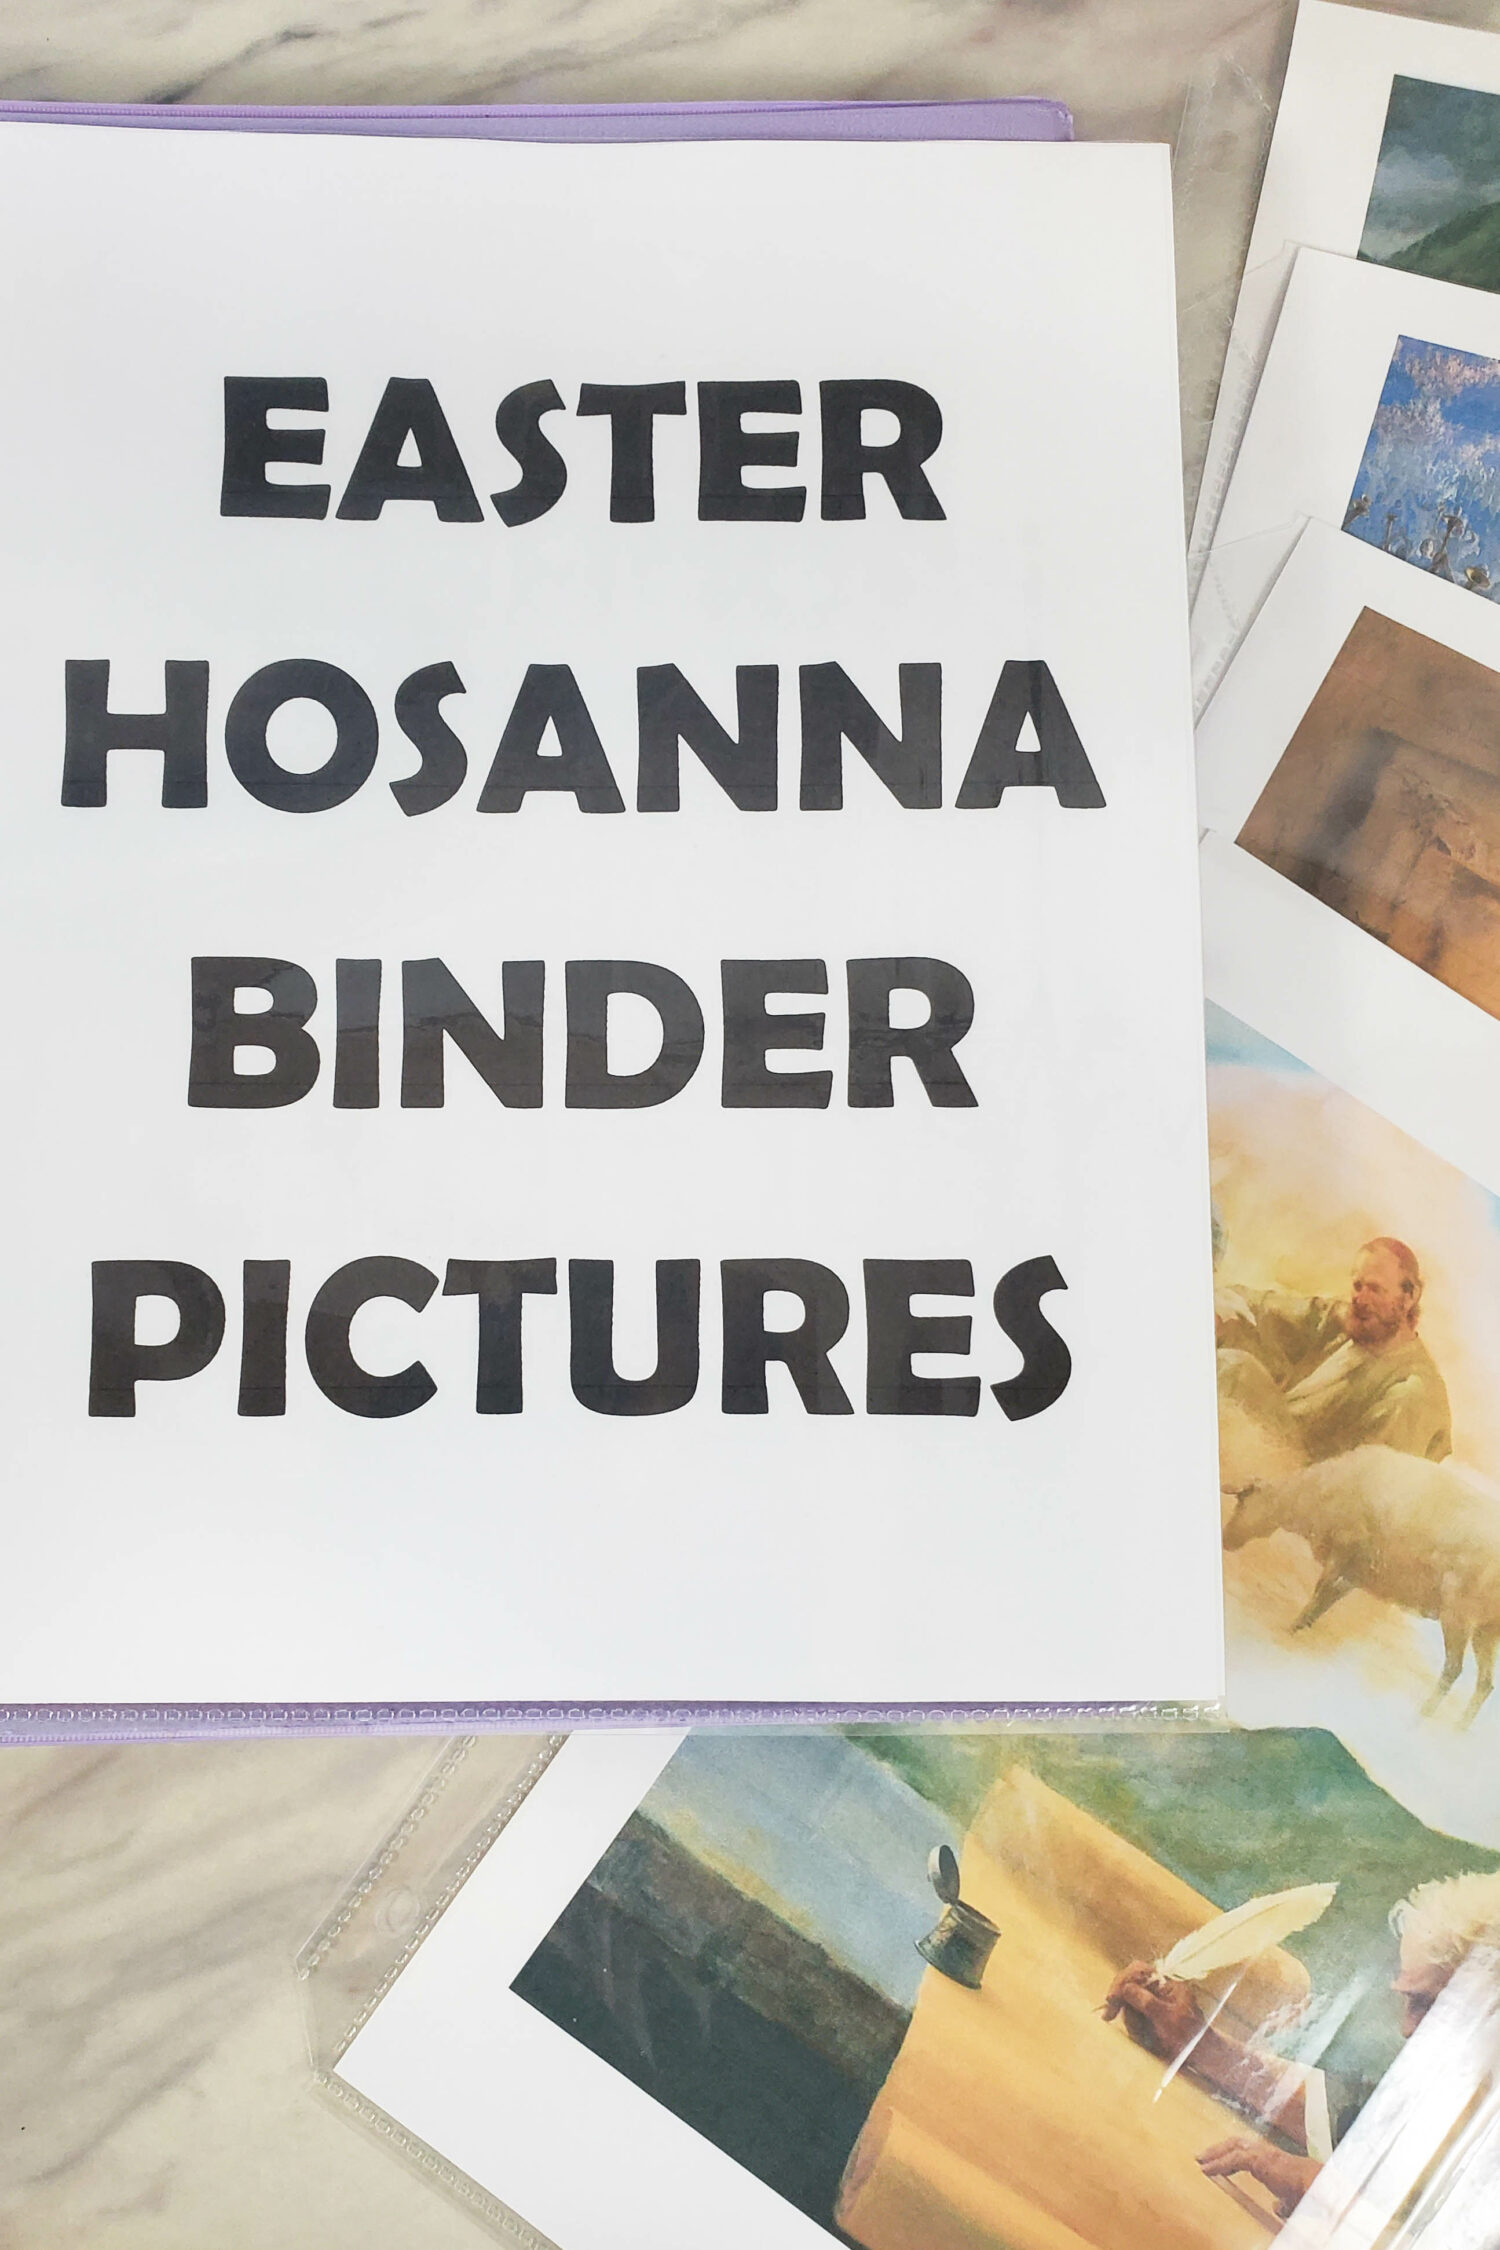 Easter Hosanna Binder Pictures fun and super easy singing time idea to help teach this beautiful Easter song in Singing Time for LDS Primary Music Leaders. Just flip through the pictures with keywords on the back of each page as you sing the story!